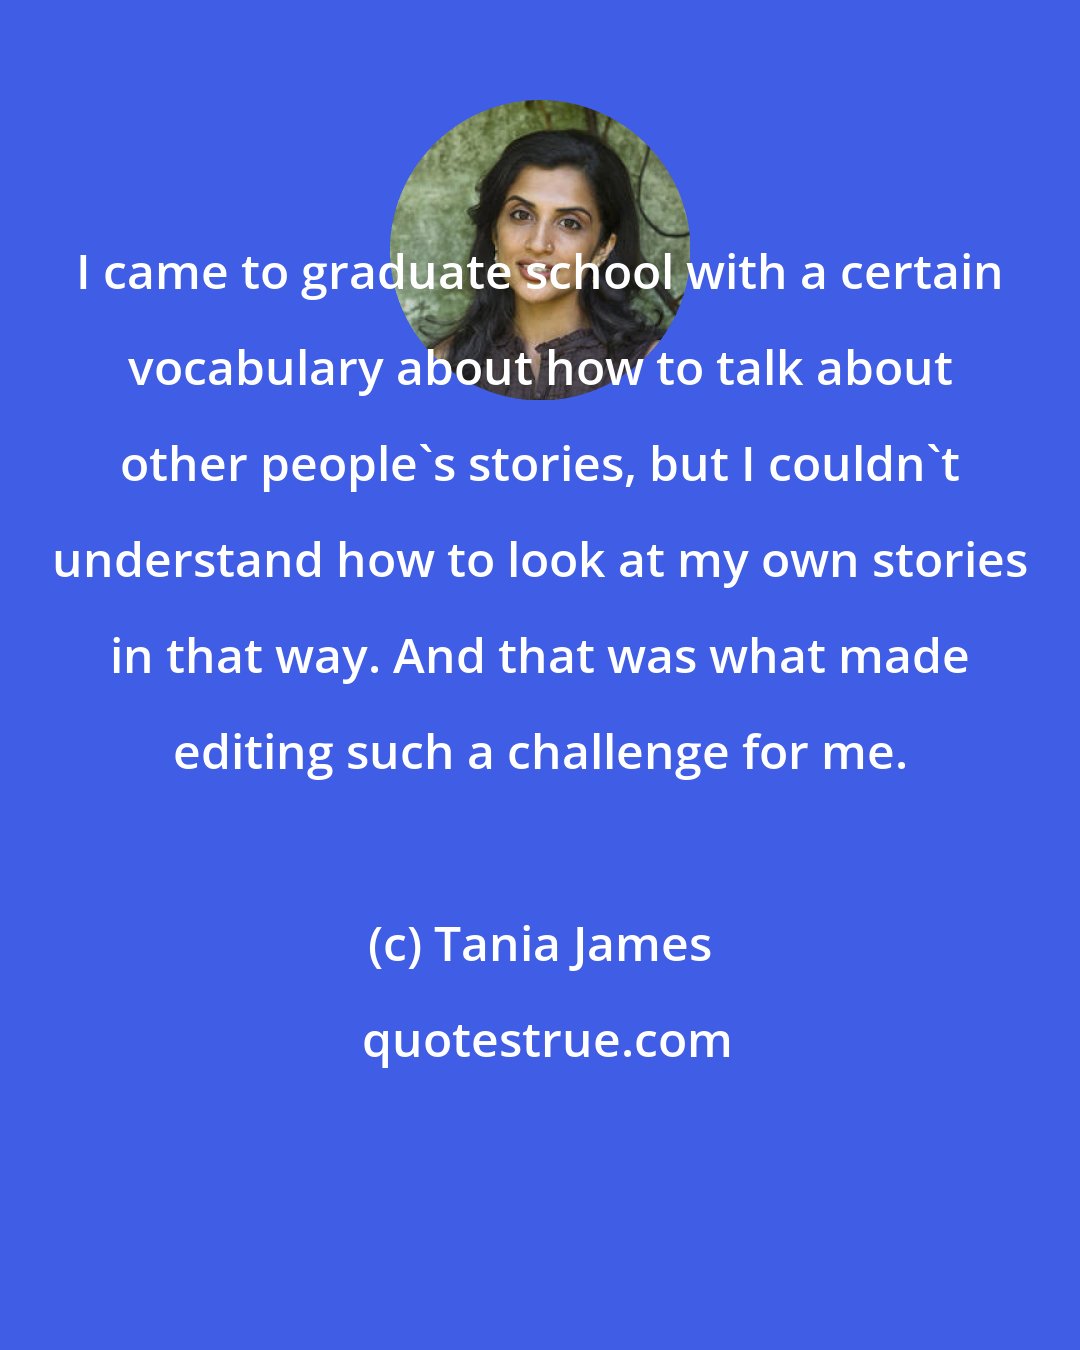 Tania James: I came to graduate school with a certain vocabulary about how to talk about other people's stories, but I couldn't understand how to look at my own stories in that way. And that was what made editing such a challenge for me.